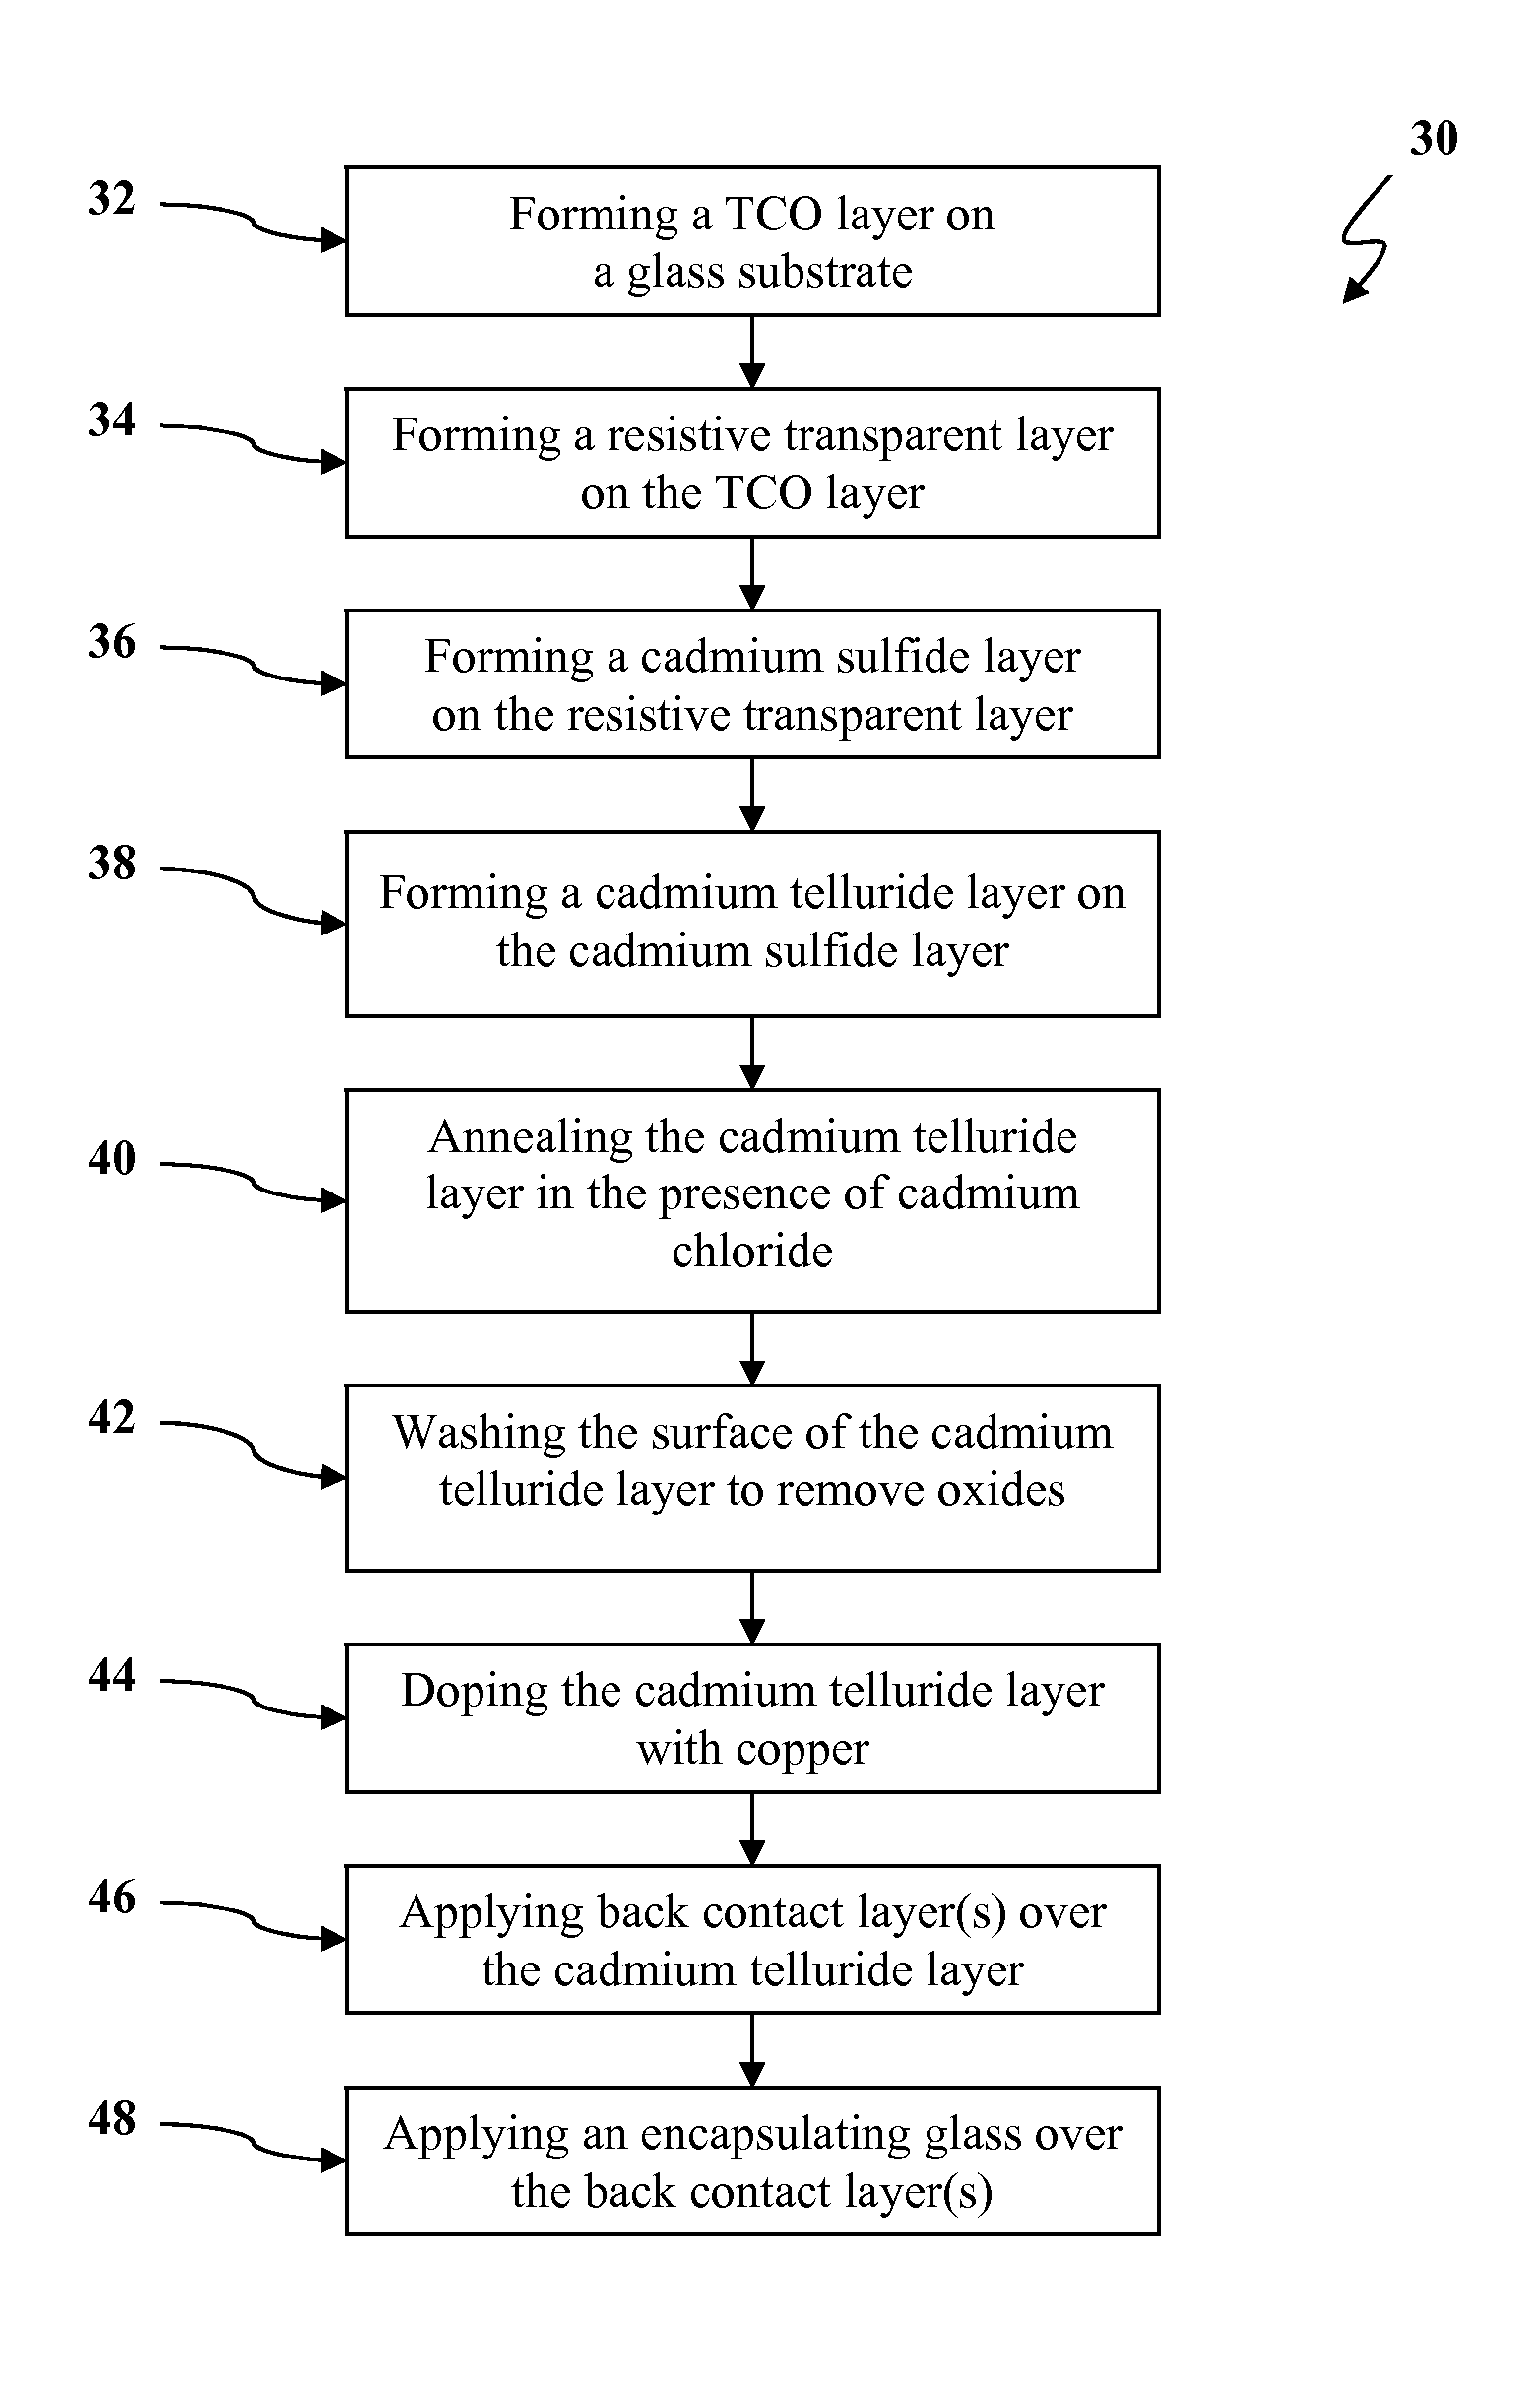 Methods of forming a conductive transparent oxide film layer for use in a cadmium telluride based thin film photovoltaic device